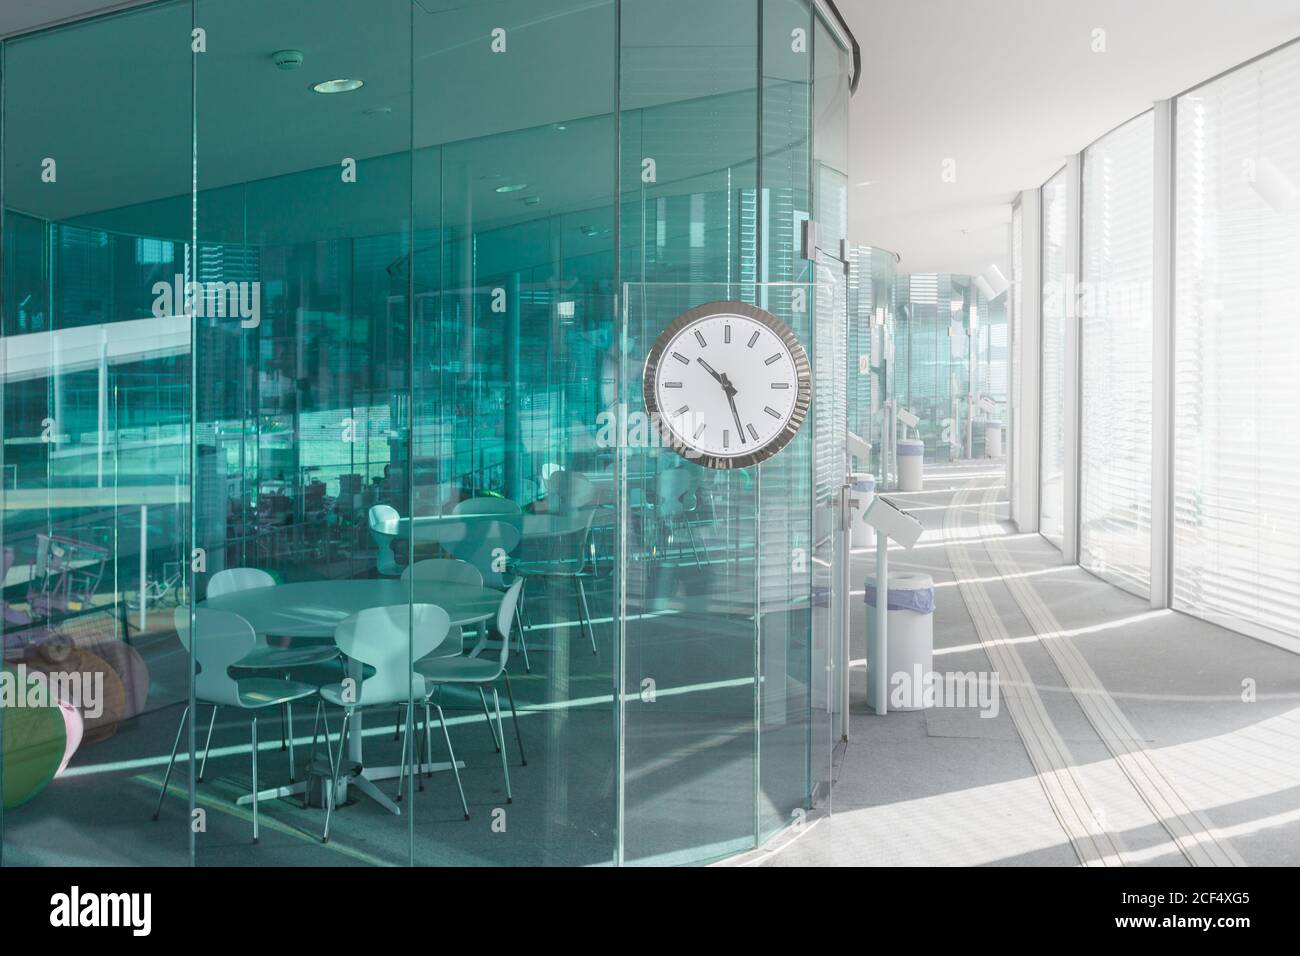 Design of modern office with blue transparent walls and light hallway with  clock, Switzerland Stock Photo - Alamy